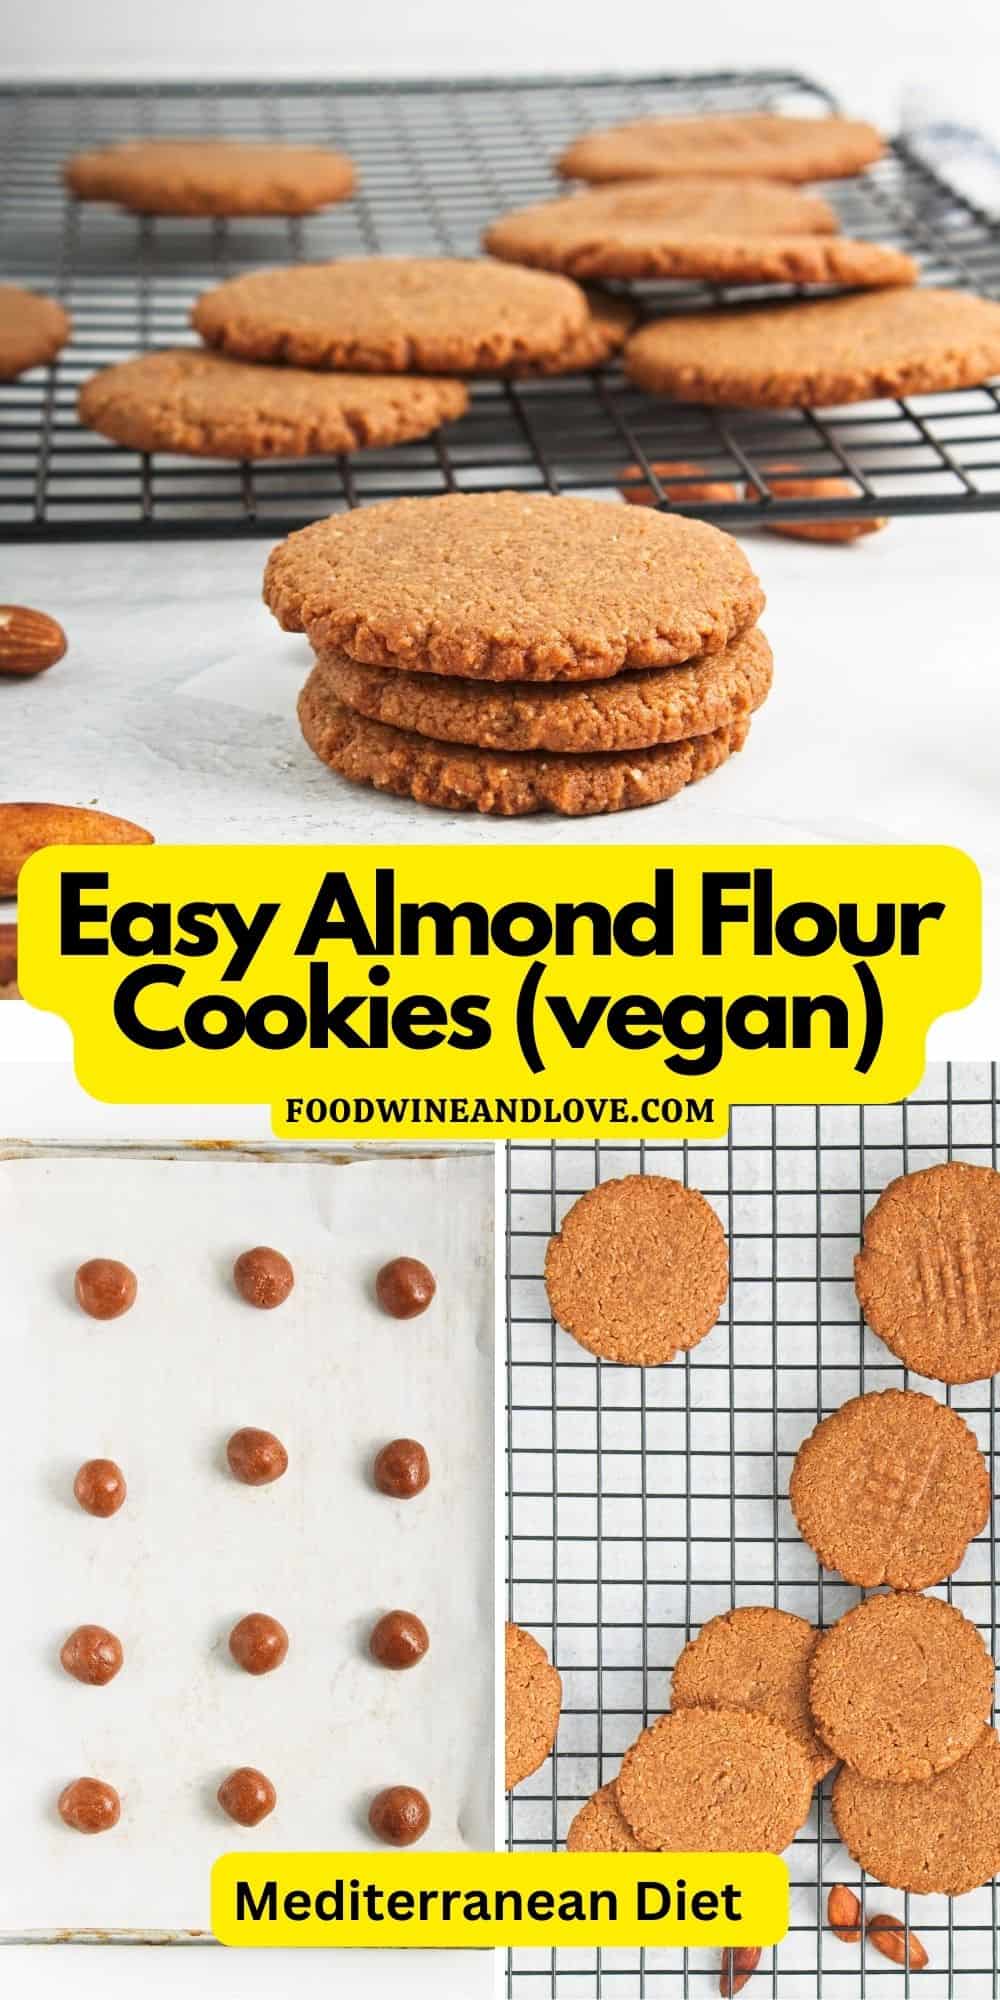 Easy Almond Flour Cookies (vegan), delicious and wholesome dessert recipe made with nutritious ingredients. Vegan, GF, Refined Sugar Free.